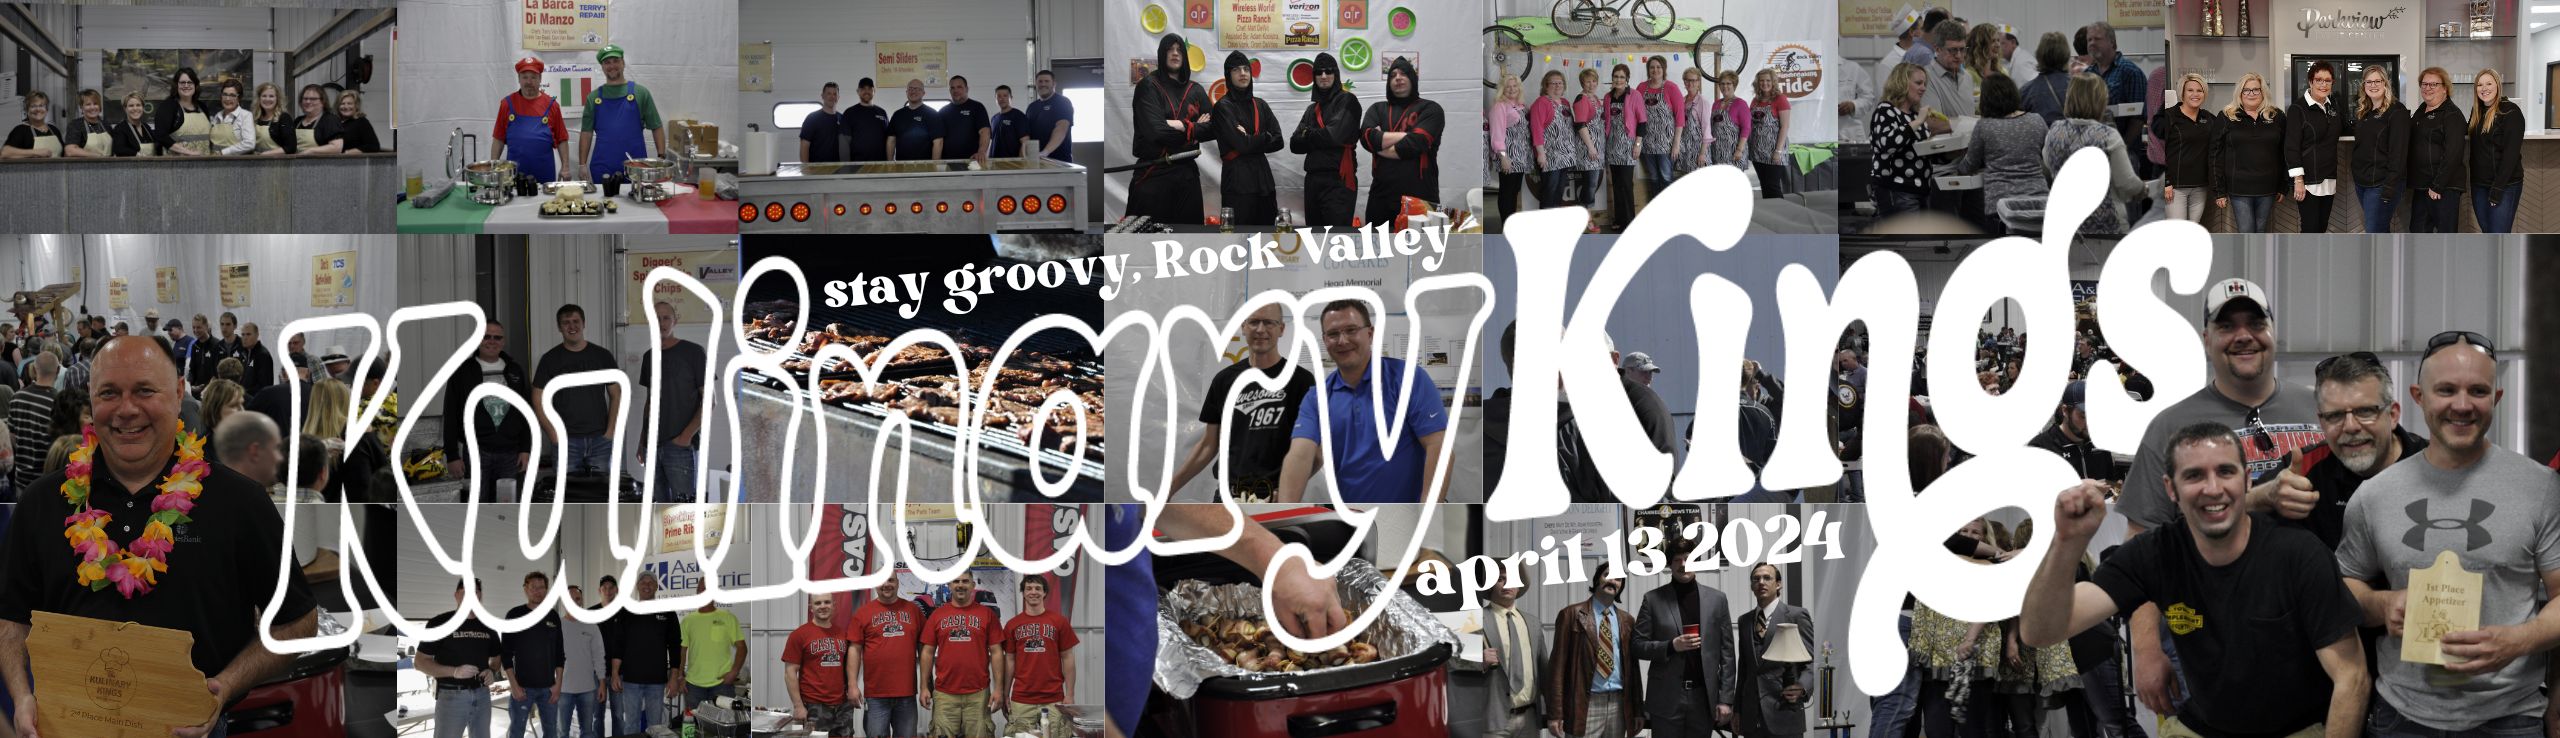 Kulinary Kings, a Hegg Foundation cook-off fundraiser in Rock Valley, IA on April 13, 2024